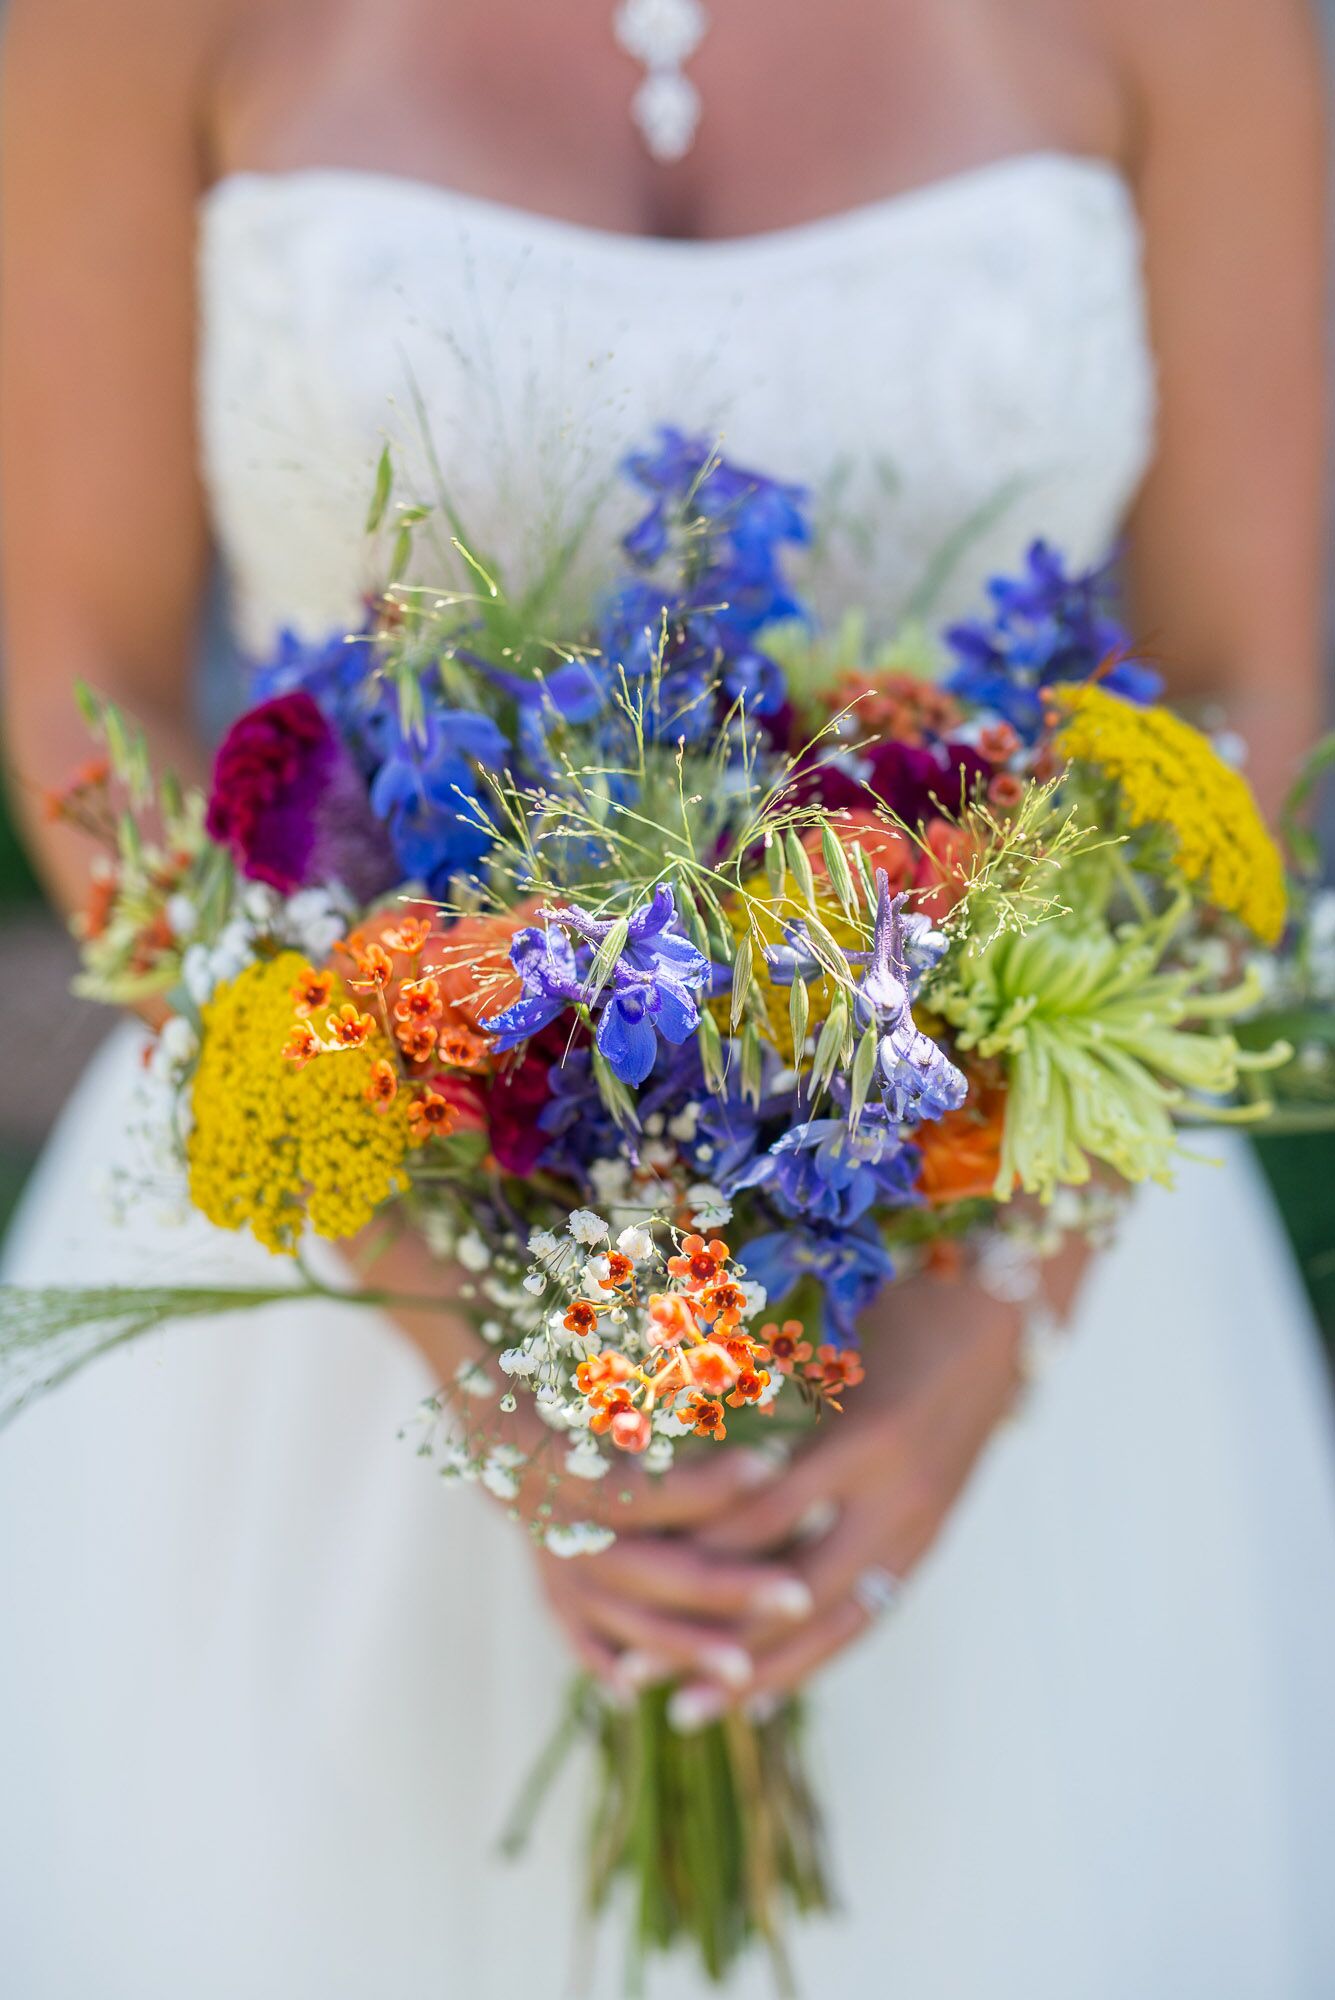 WildflowerInspired Colorful Bridal Bouquet